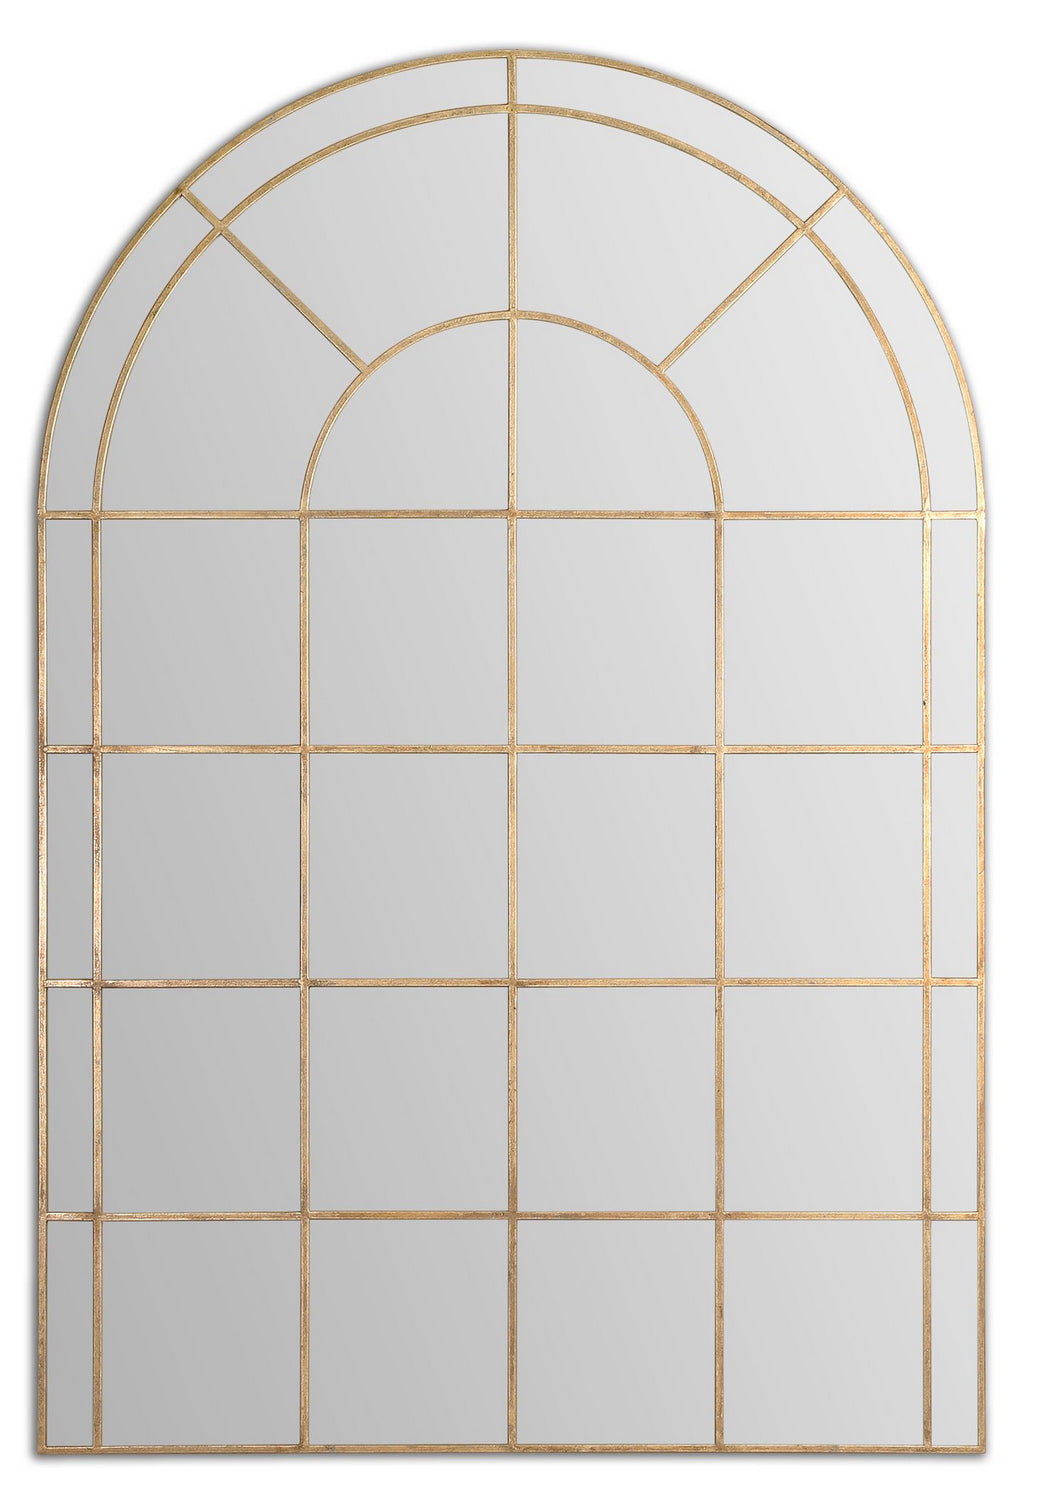 Uttermost's Grantola Arched Mirror Designed by Grace Feyock